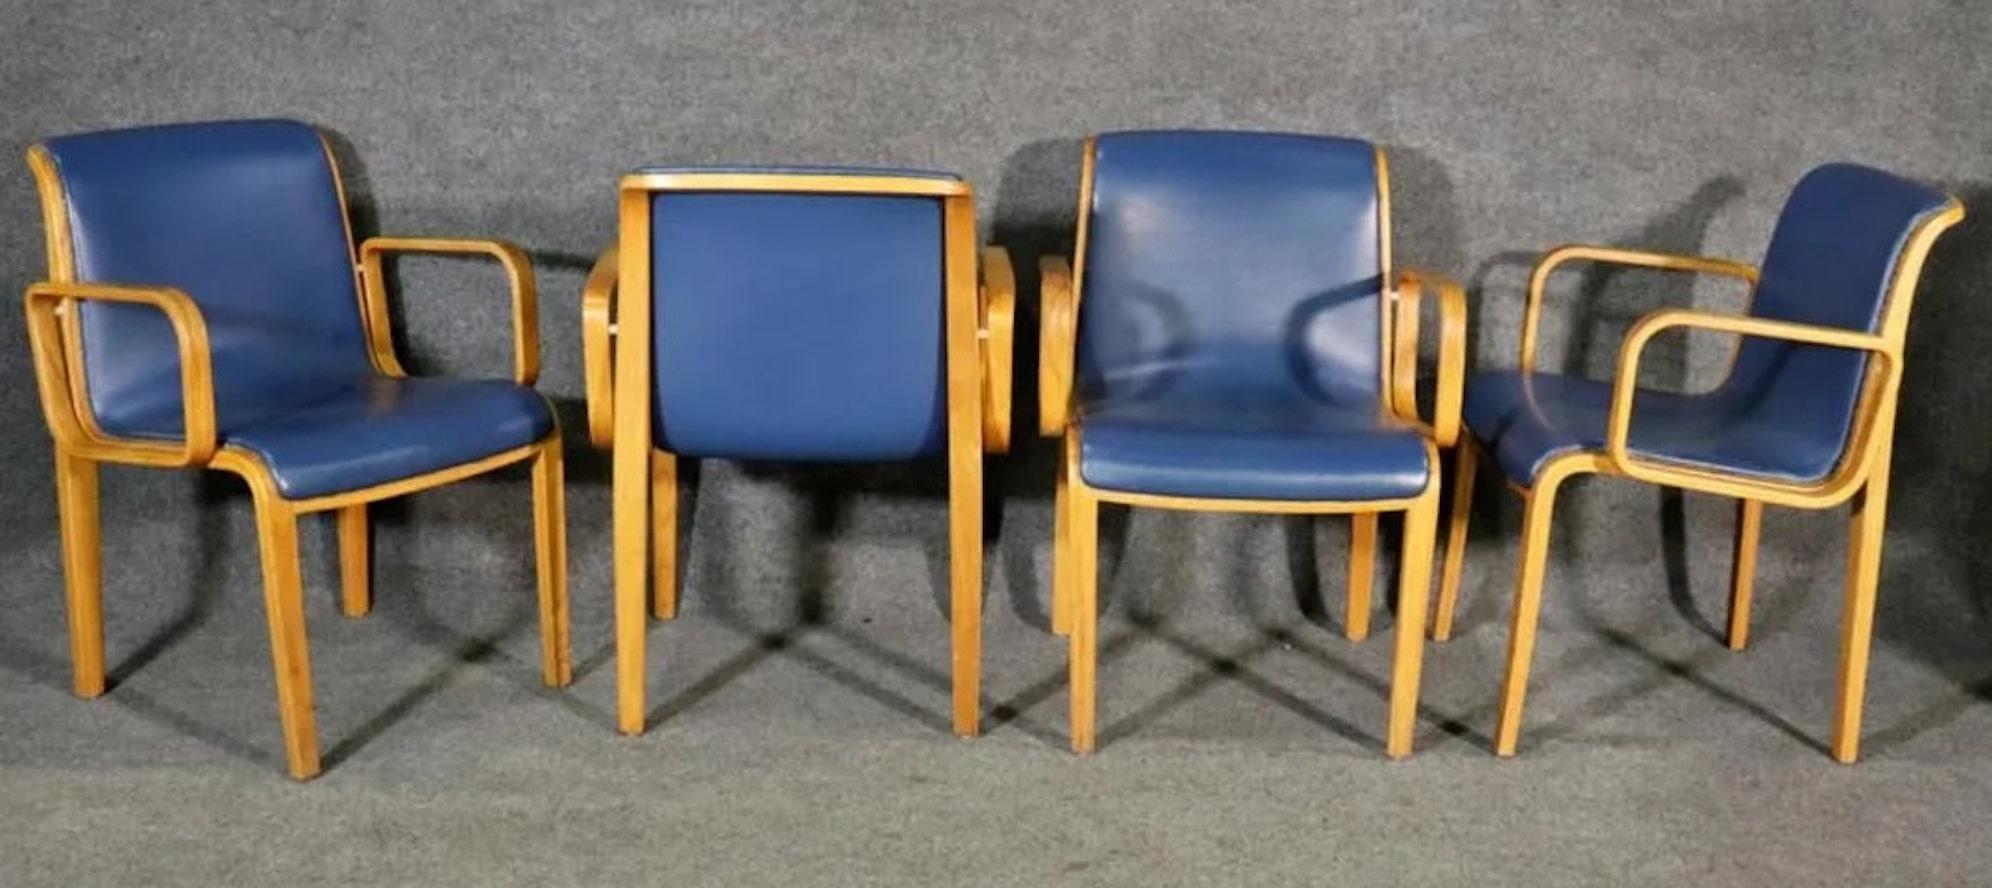 Four Bill Stephens for Knoll, two Stending Co chairs. All in the same upholstery with bentwood arms.
4 chairs measure 31 1/2